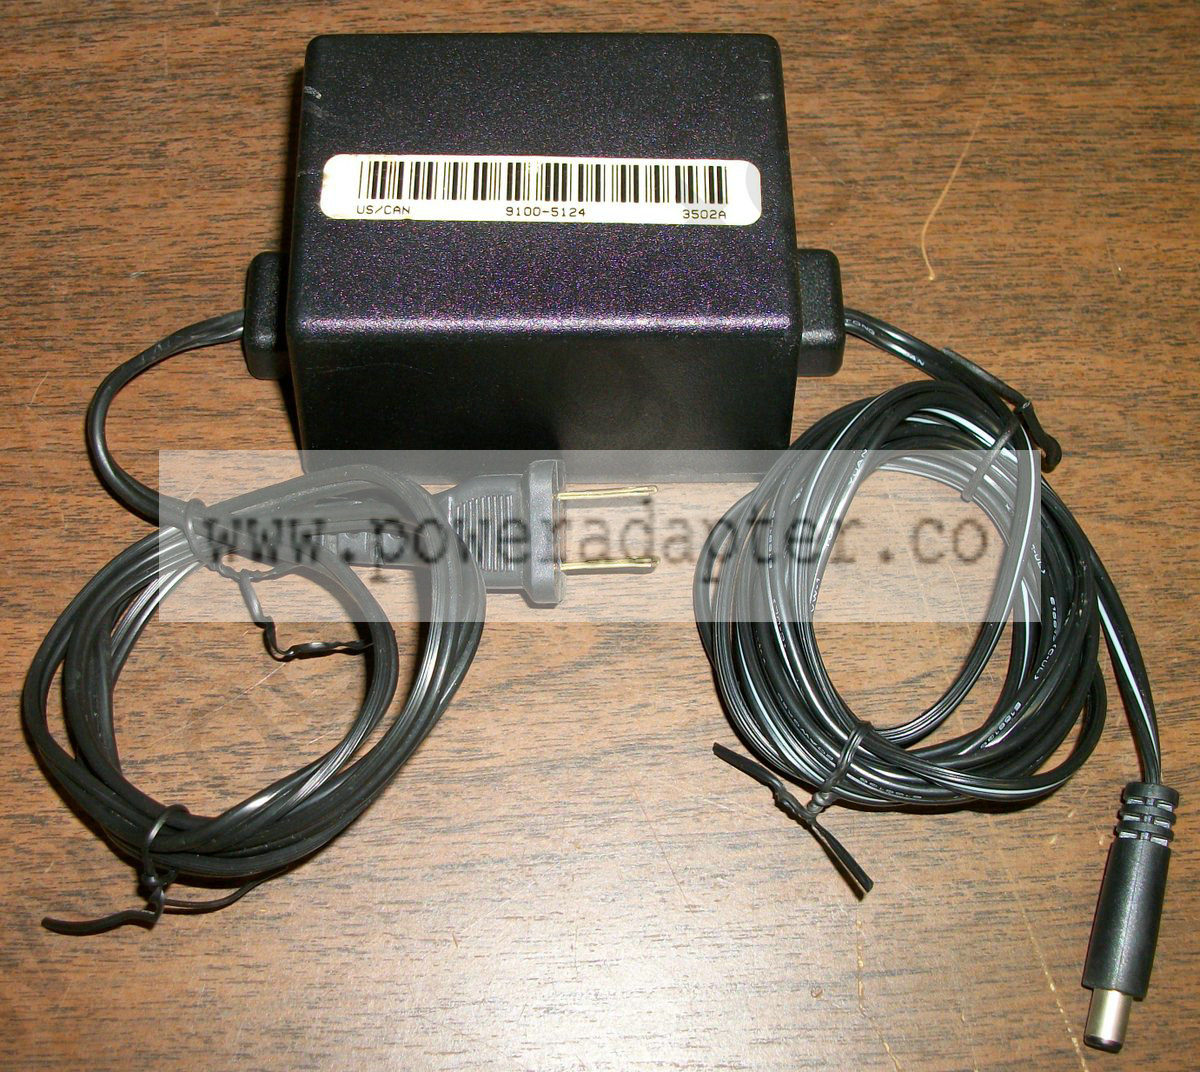 HP C2175A AC Adapter Power Supply 30V DC [C2175A] This AC adapter is for use with some older HP printers. Input: 120 V